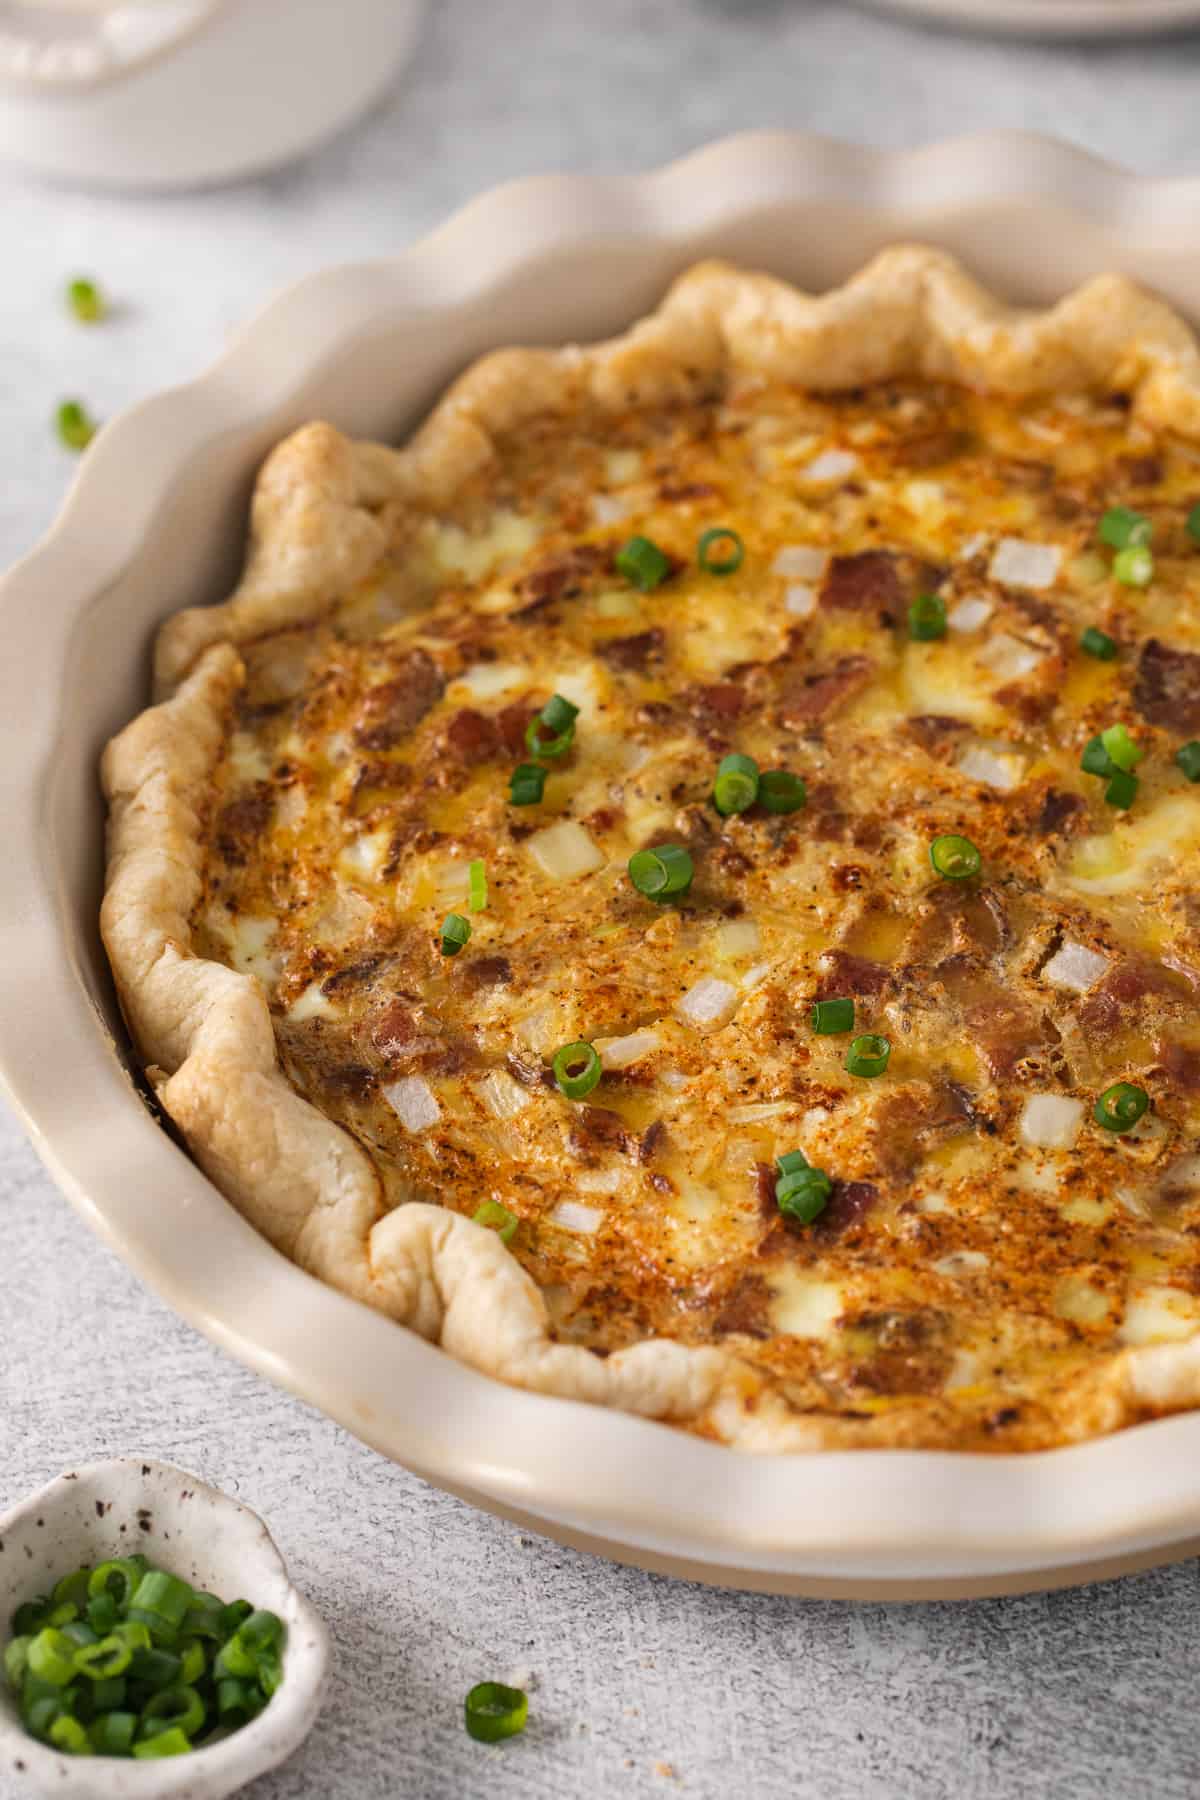 Quiche lorraine topped with green onions.